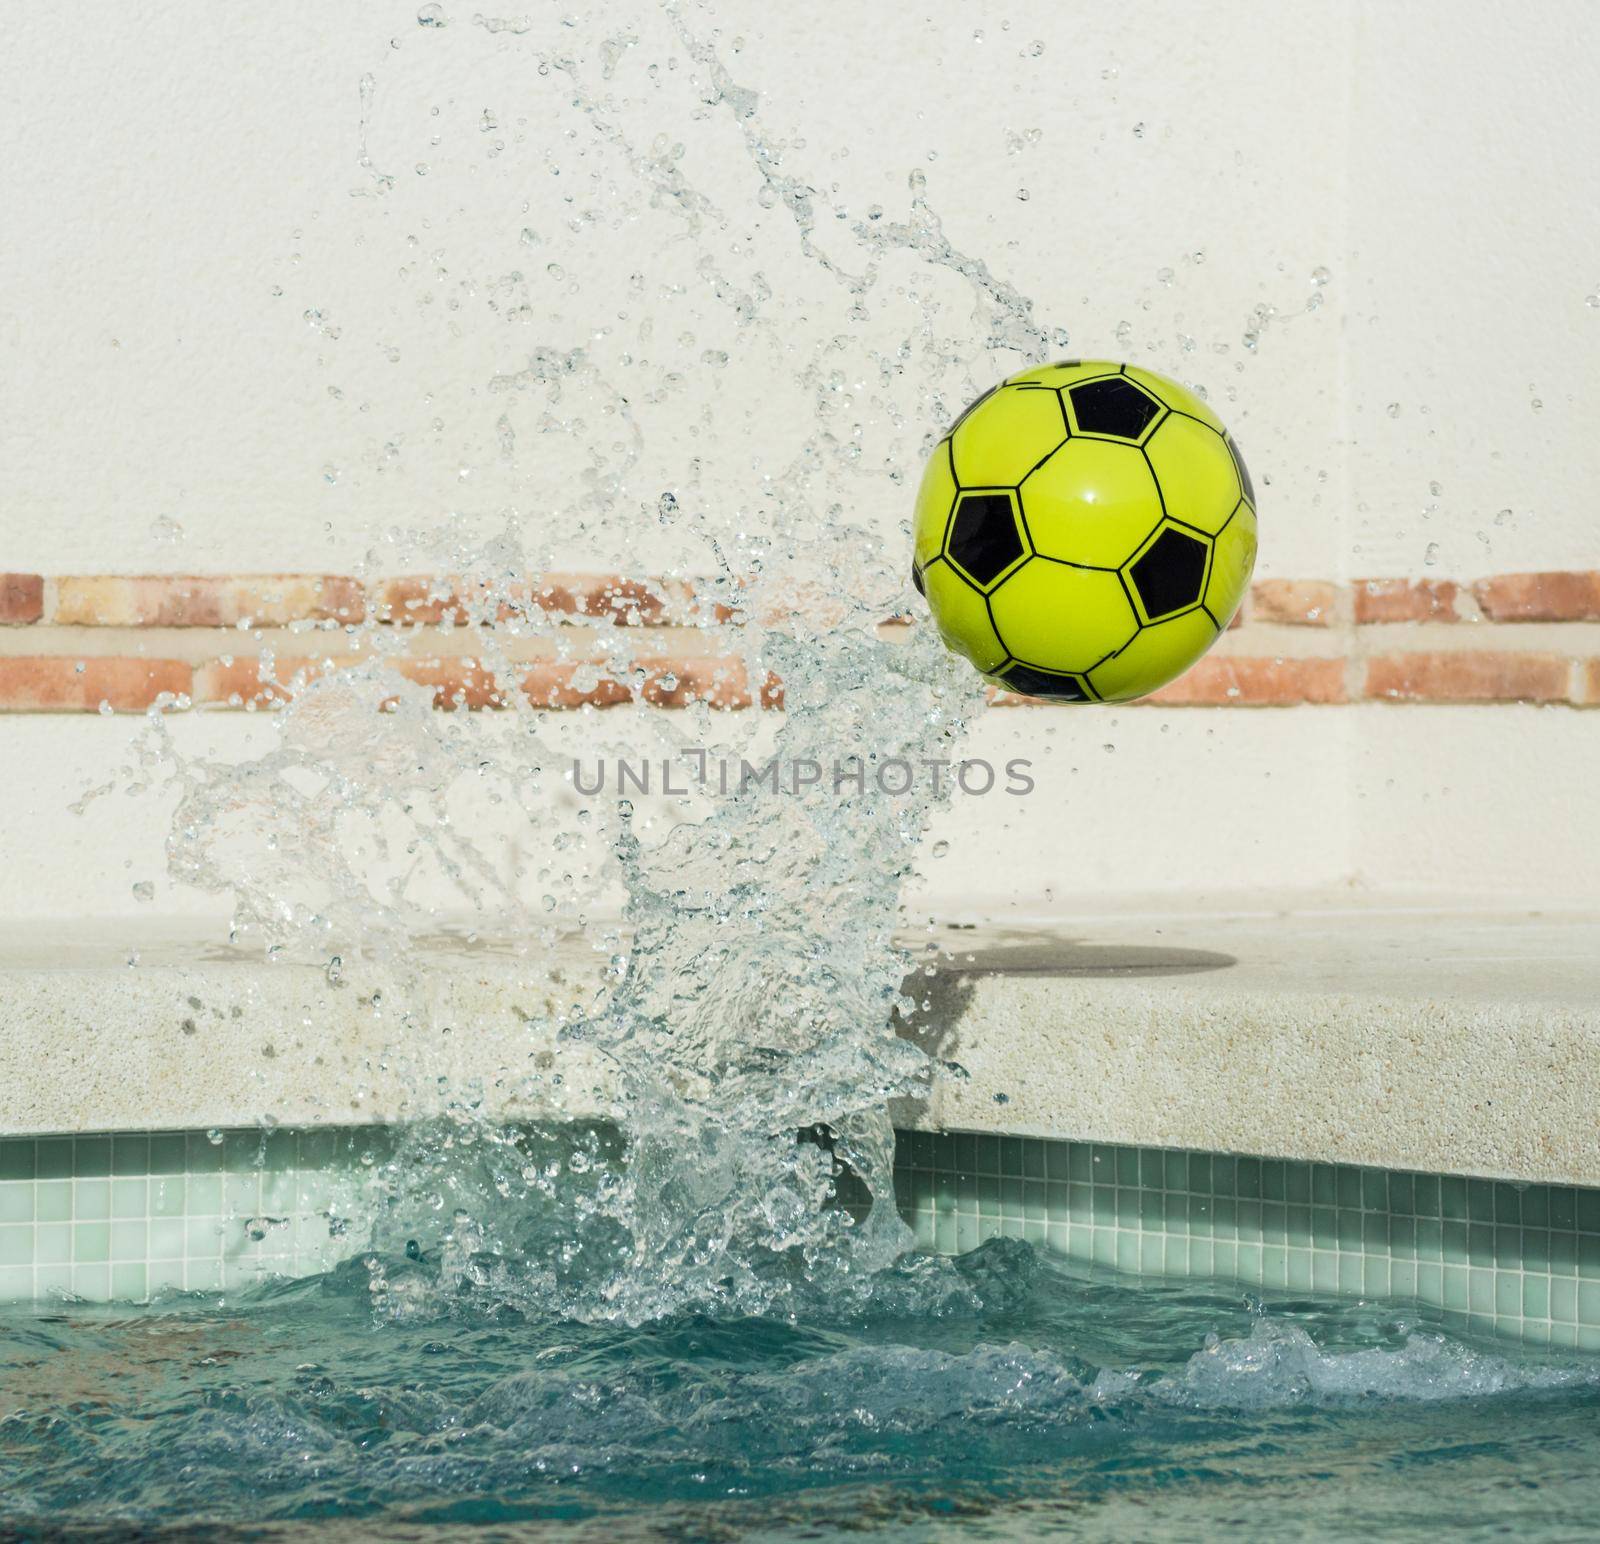 ball coming out of the water by jatmikaV